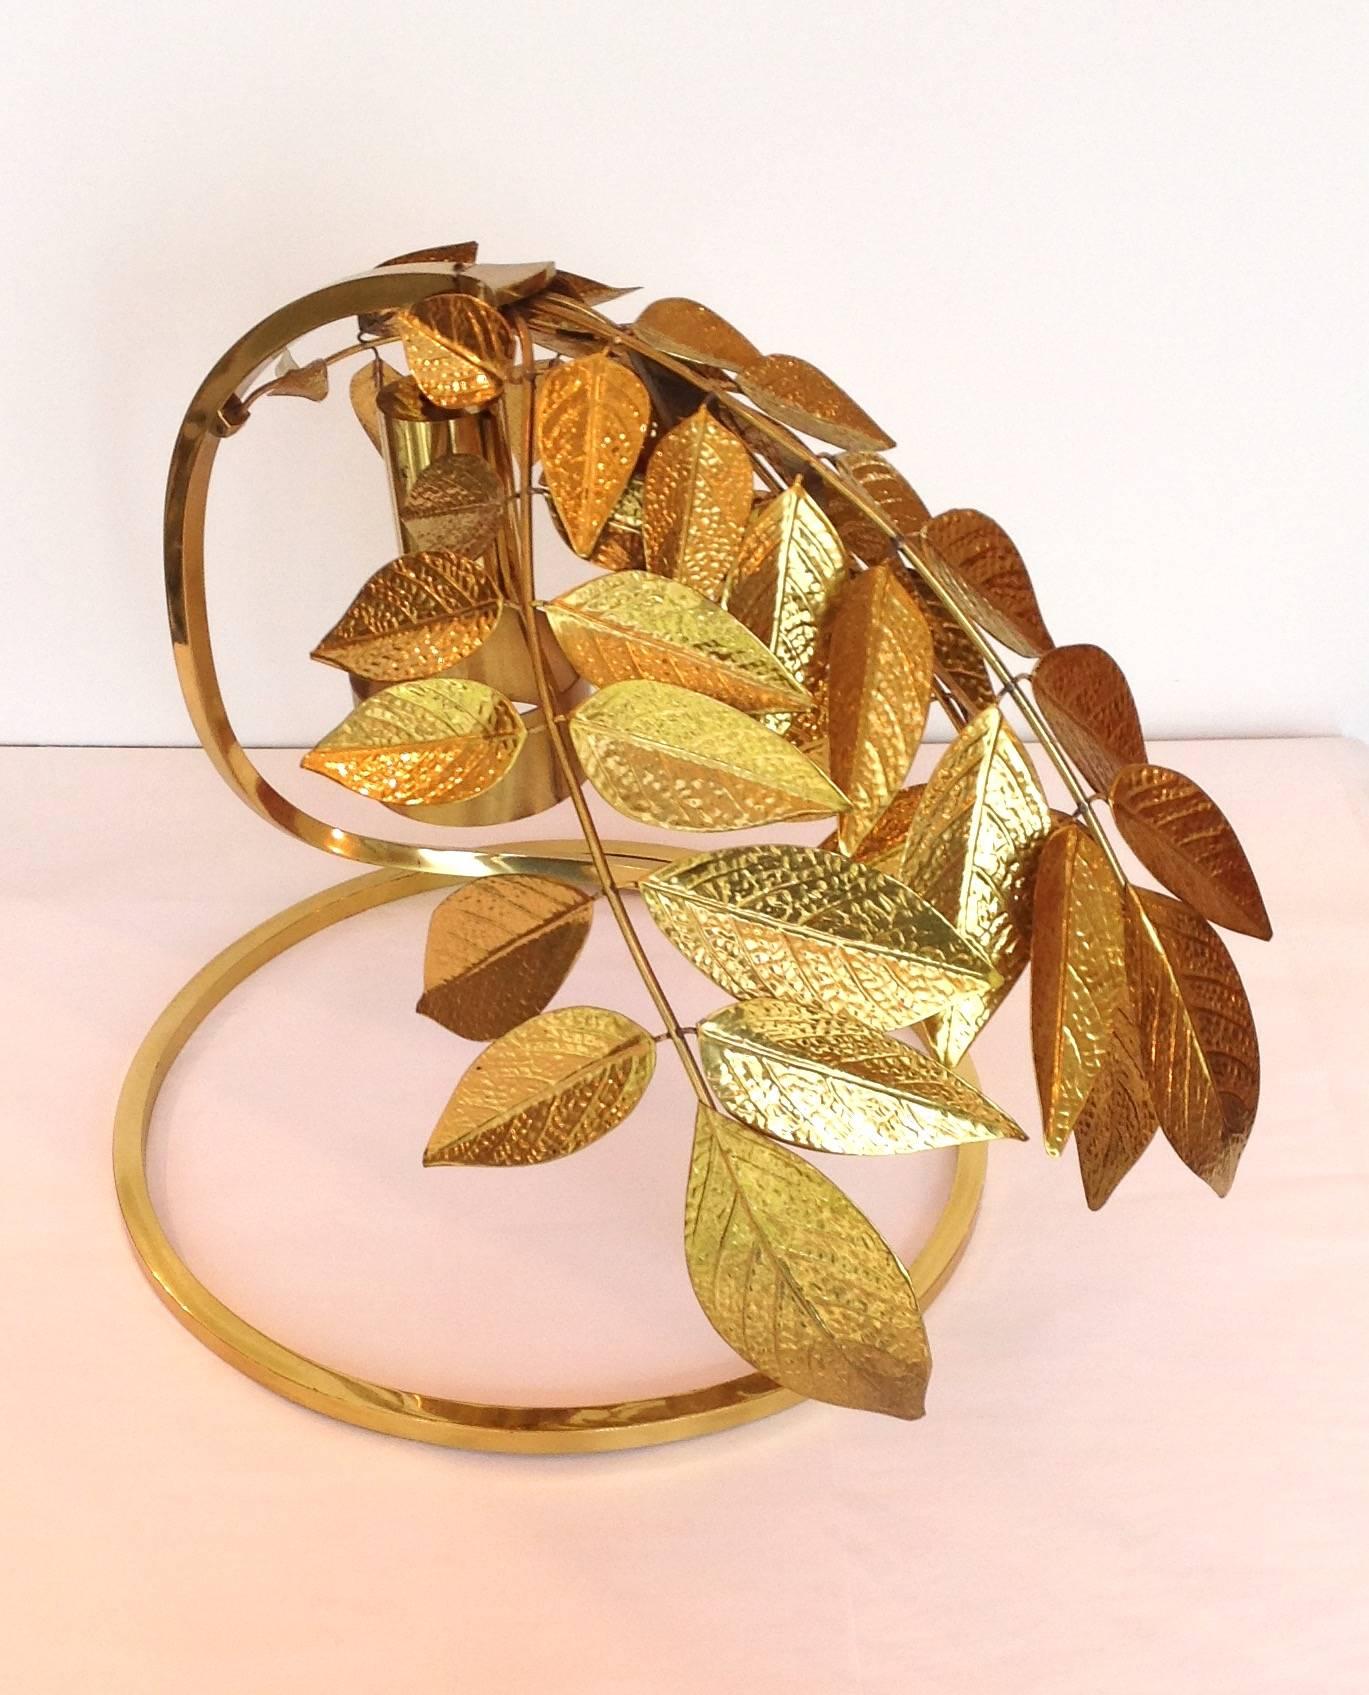 Tomasso Barbi Hammered Brass Leaves Lamp In Excellent Condition For Sale In Houston, TX